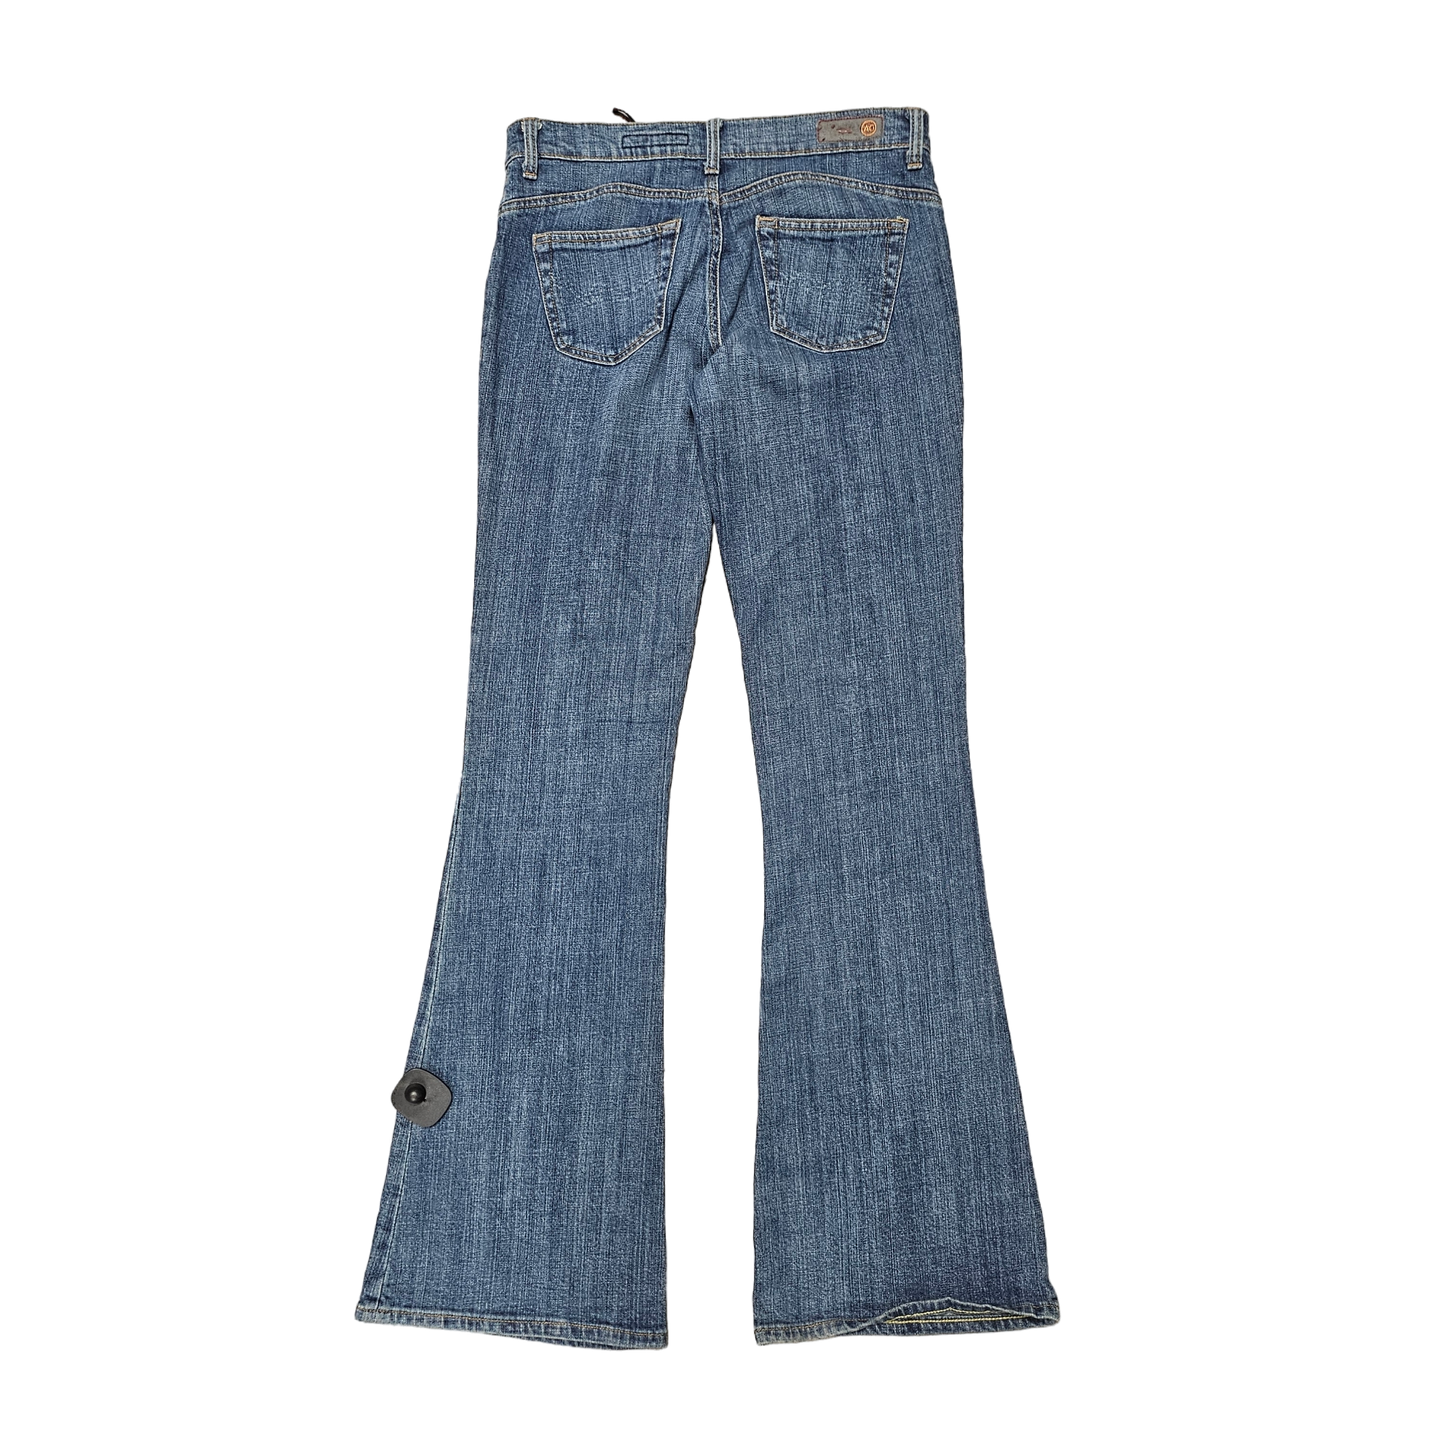 Jeans Flared By Adriano Goldschmied  Size: 29